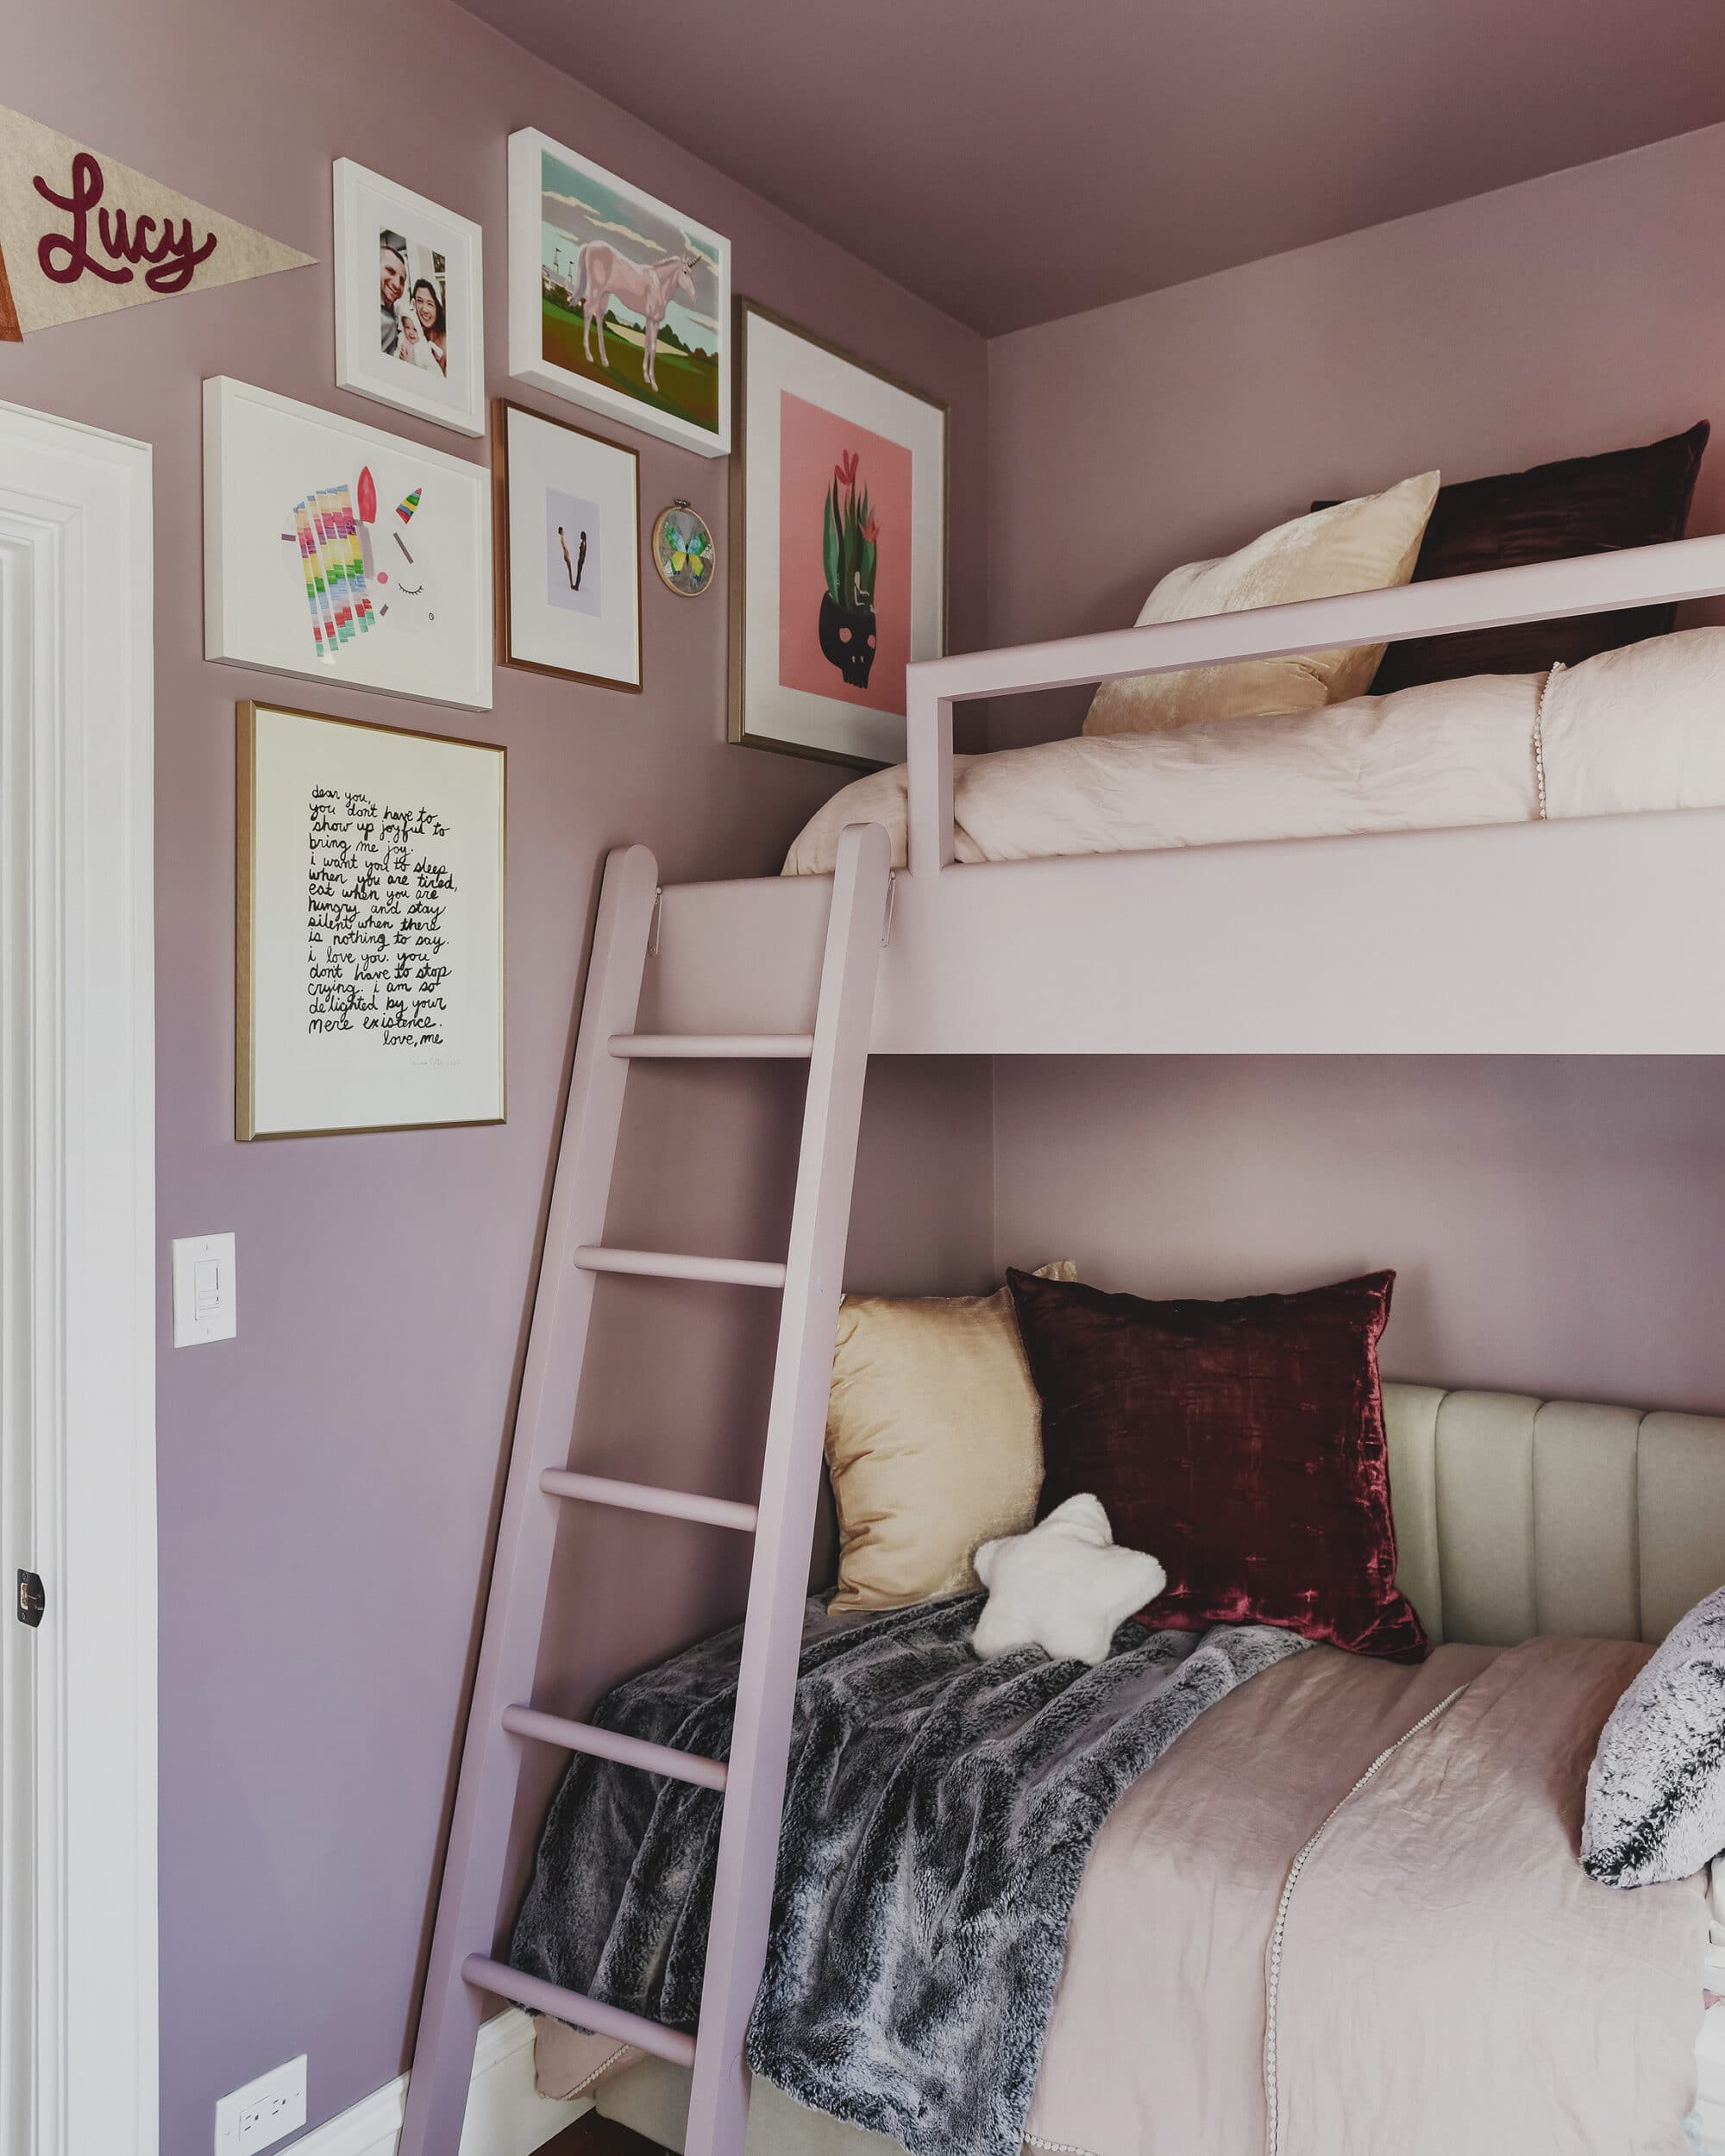 Closer look at bunk bed with gallery wall intertwined | purple and unicorn bedroom for a big kid via Yellow Brick Home